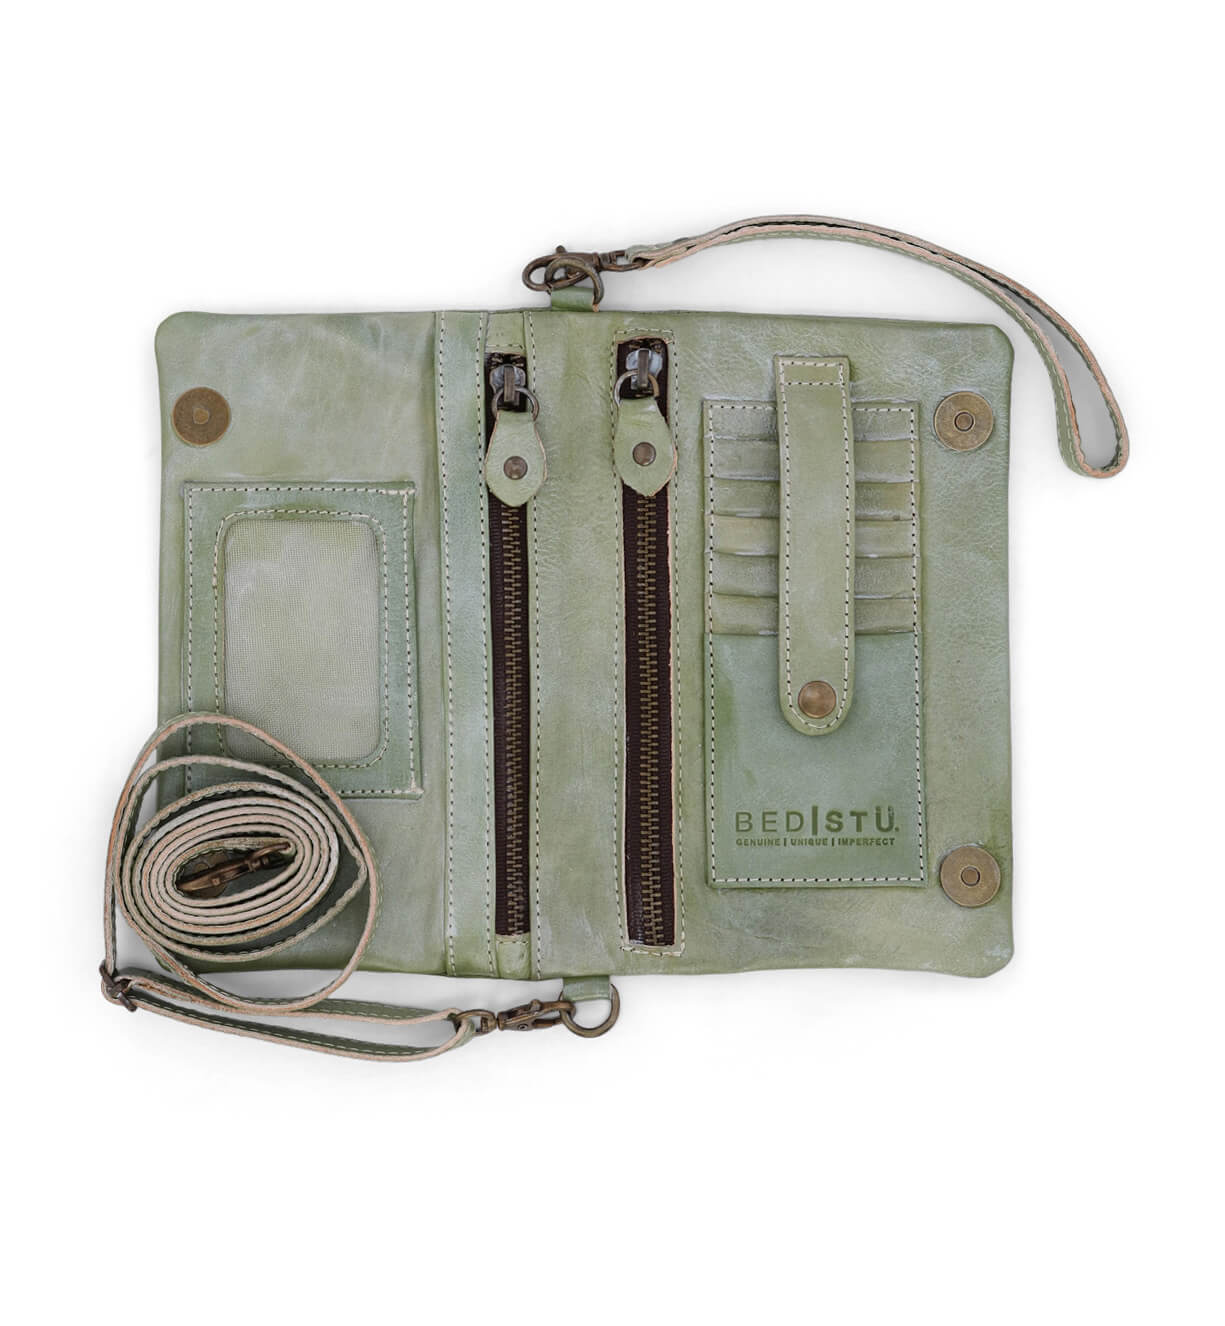 A Cadence wallet from the brand Bed Stu, made of green leather and with a strap.